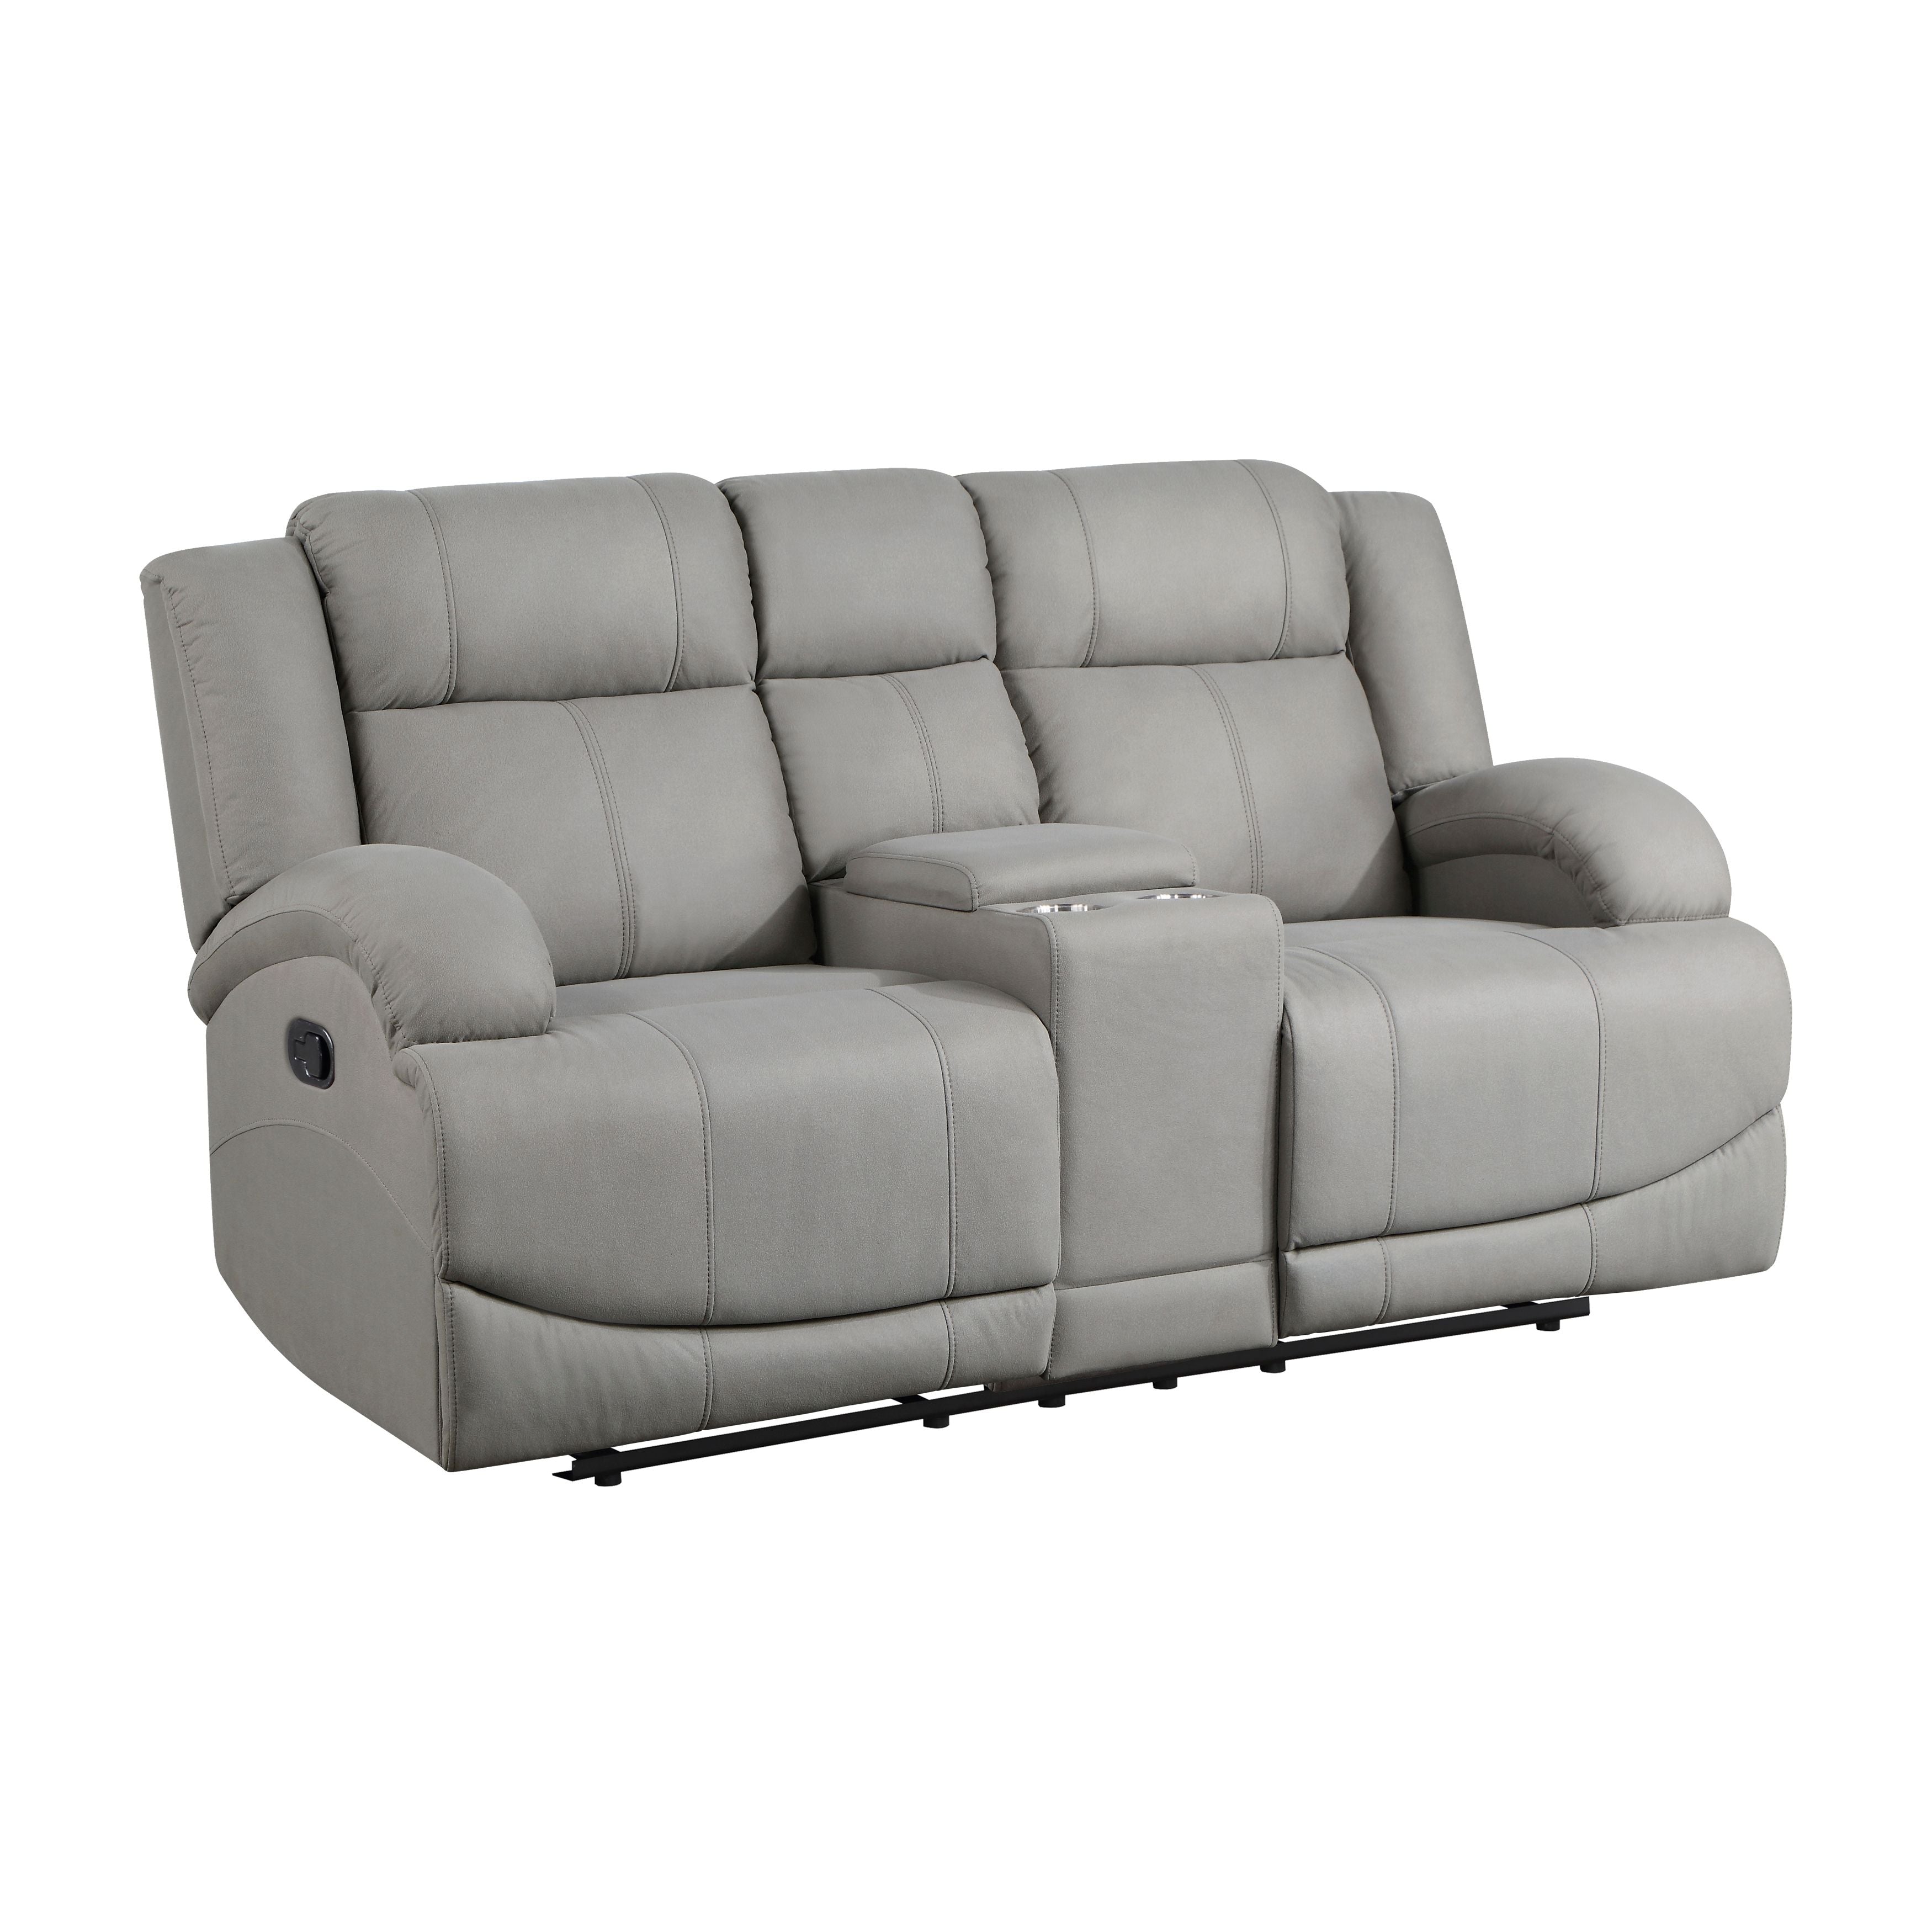 Attractive Gray Color Microfiber Upholstered 1 Piece Double Reclining Loveseat With Center Console Transitional Living Room